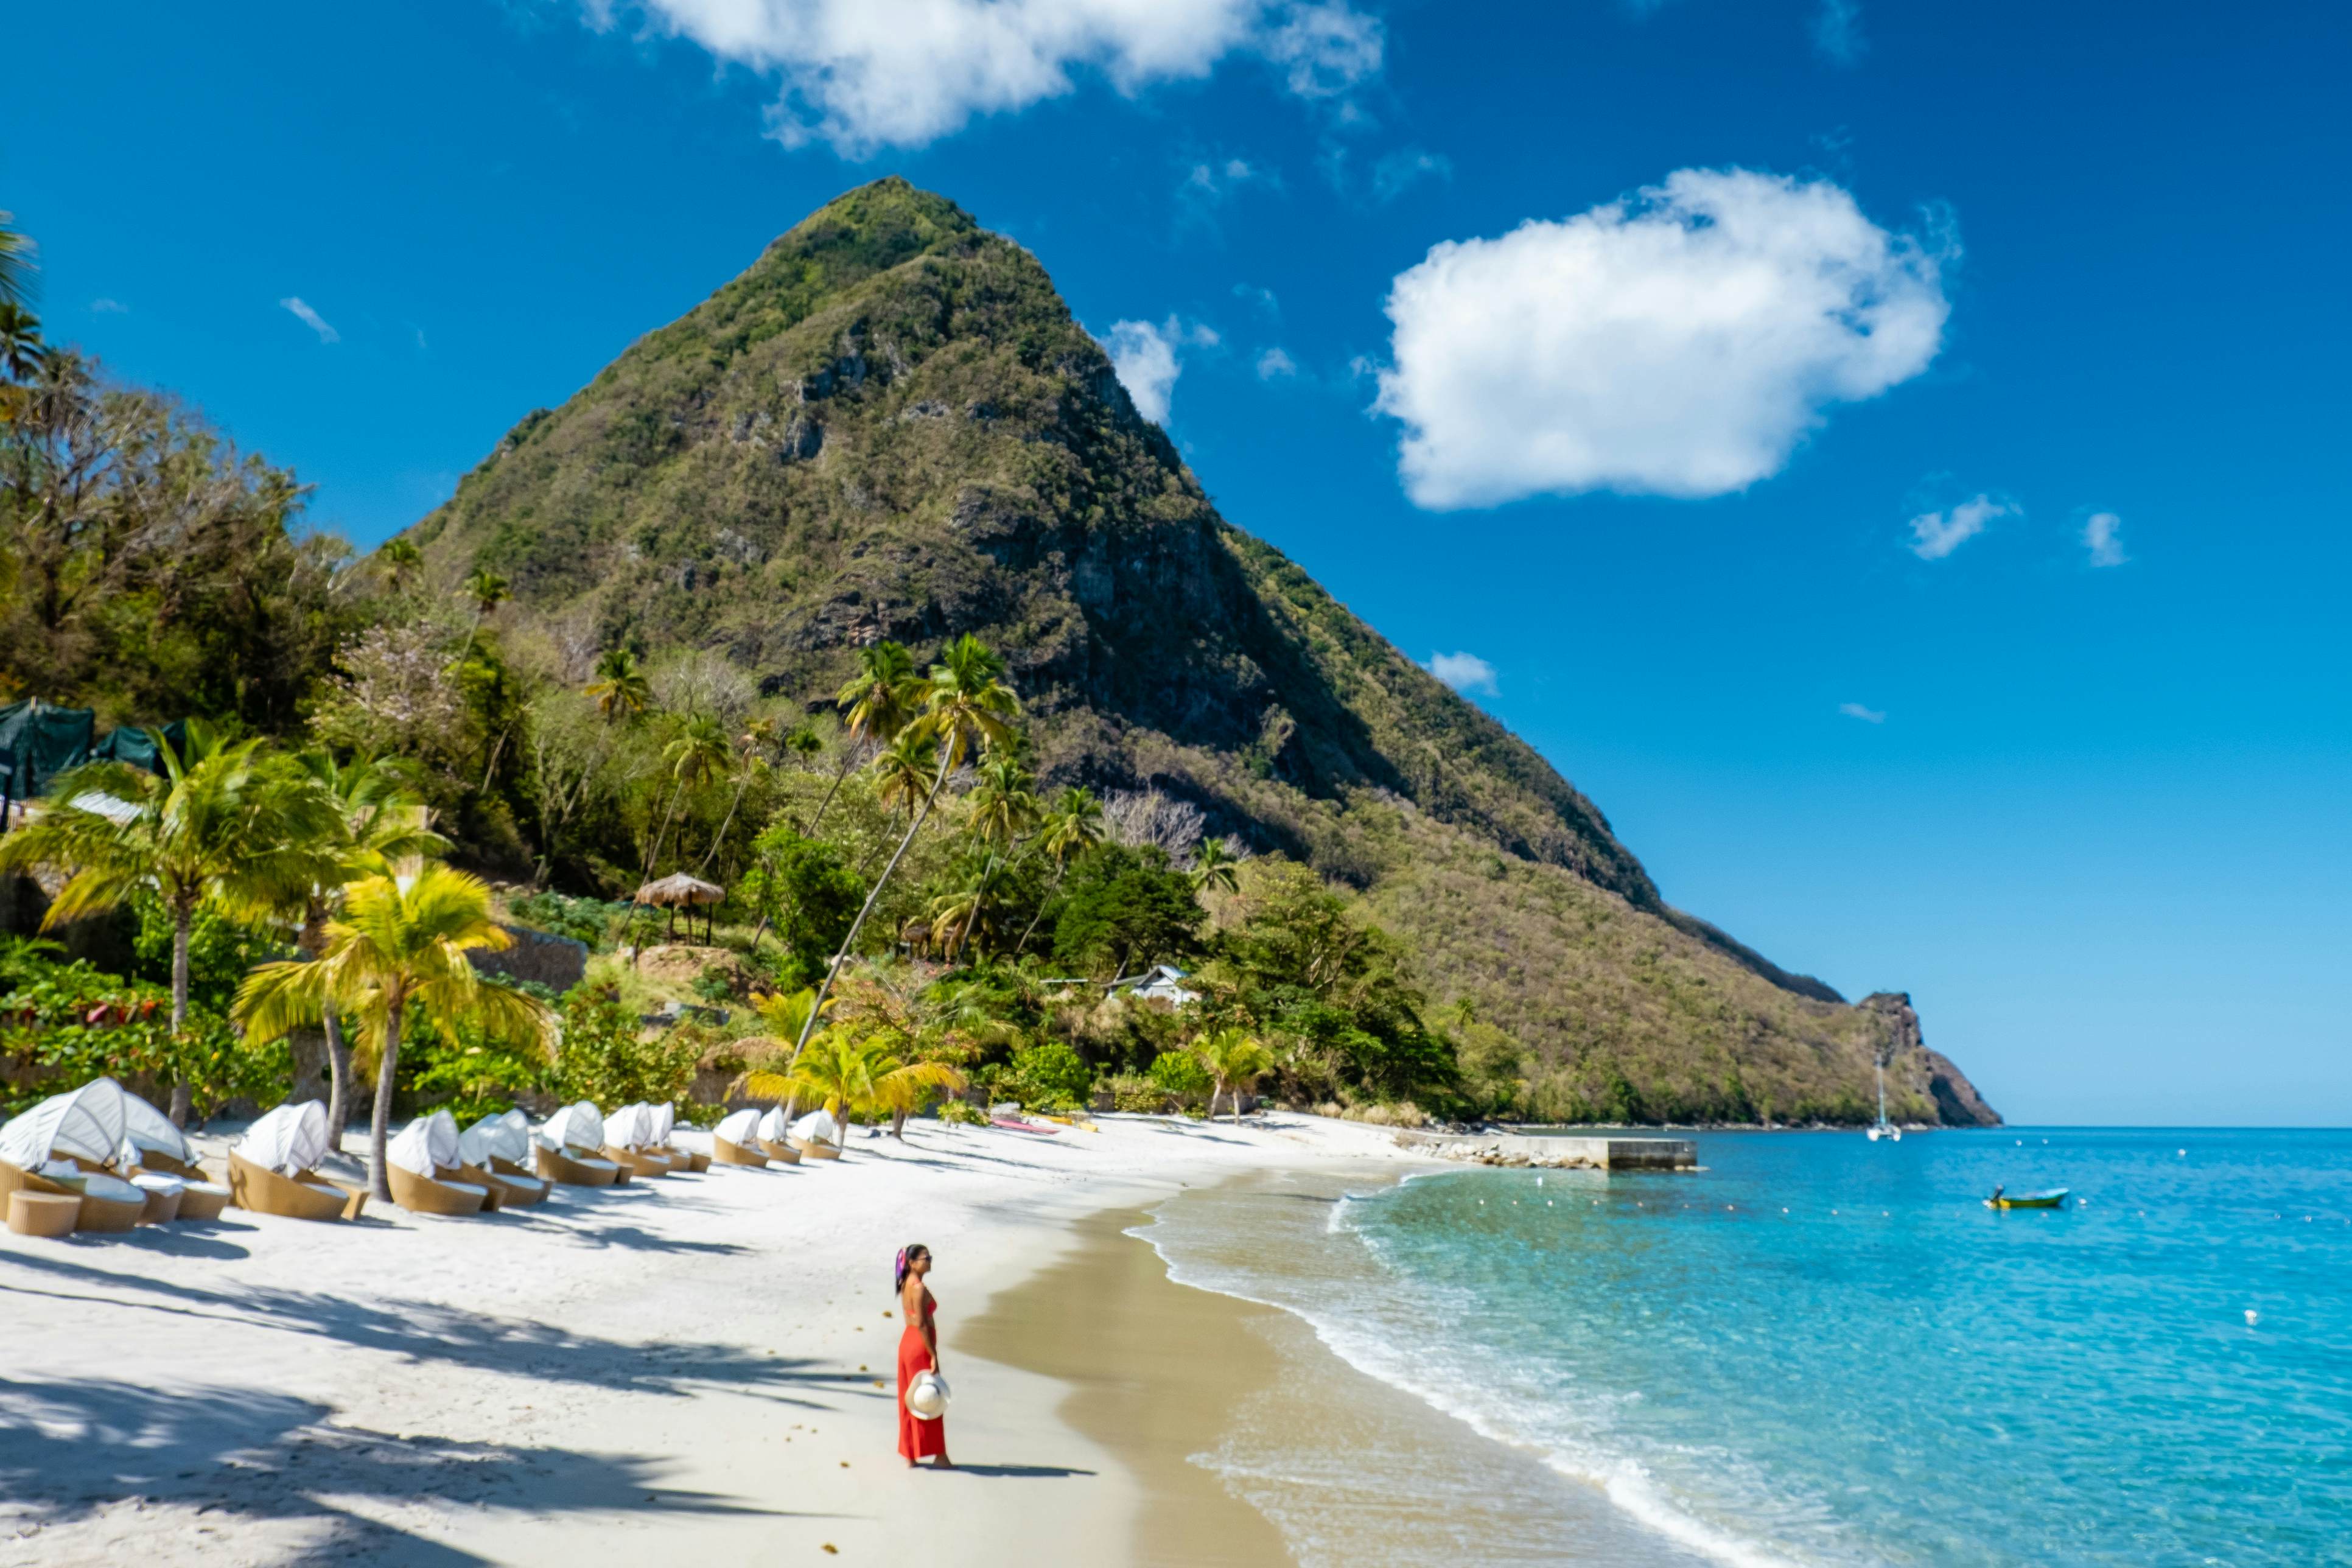 8 under-the-radar places to visit in Caribbean - Lonely Planet